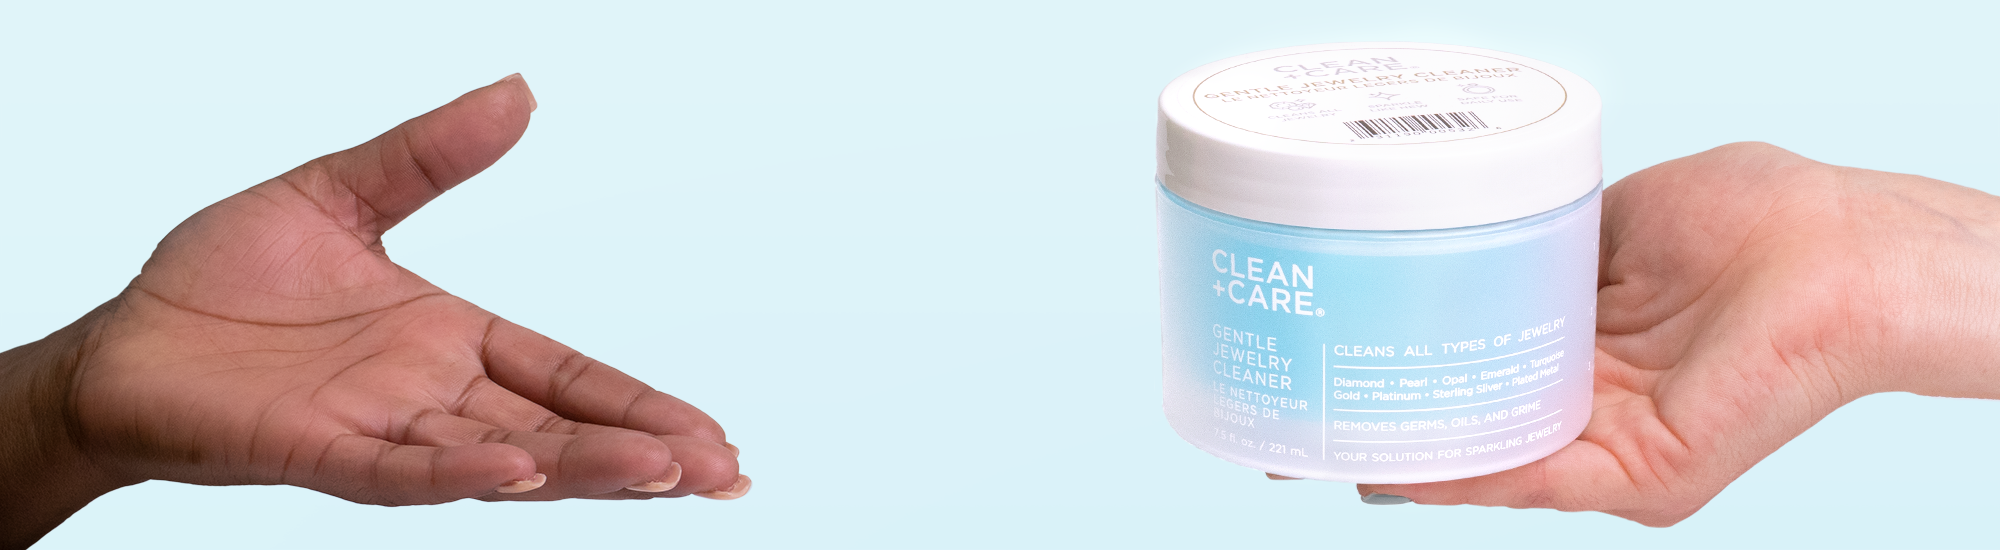 Clean And Care Gentle Jewelry Cleaner